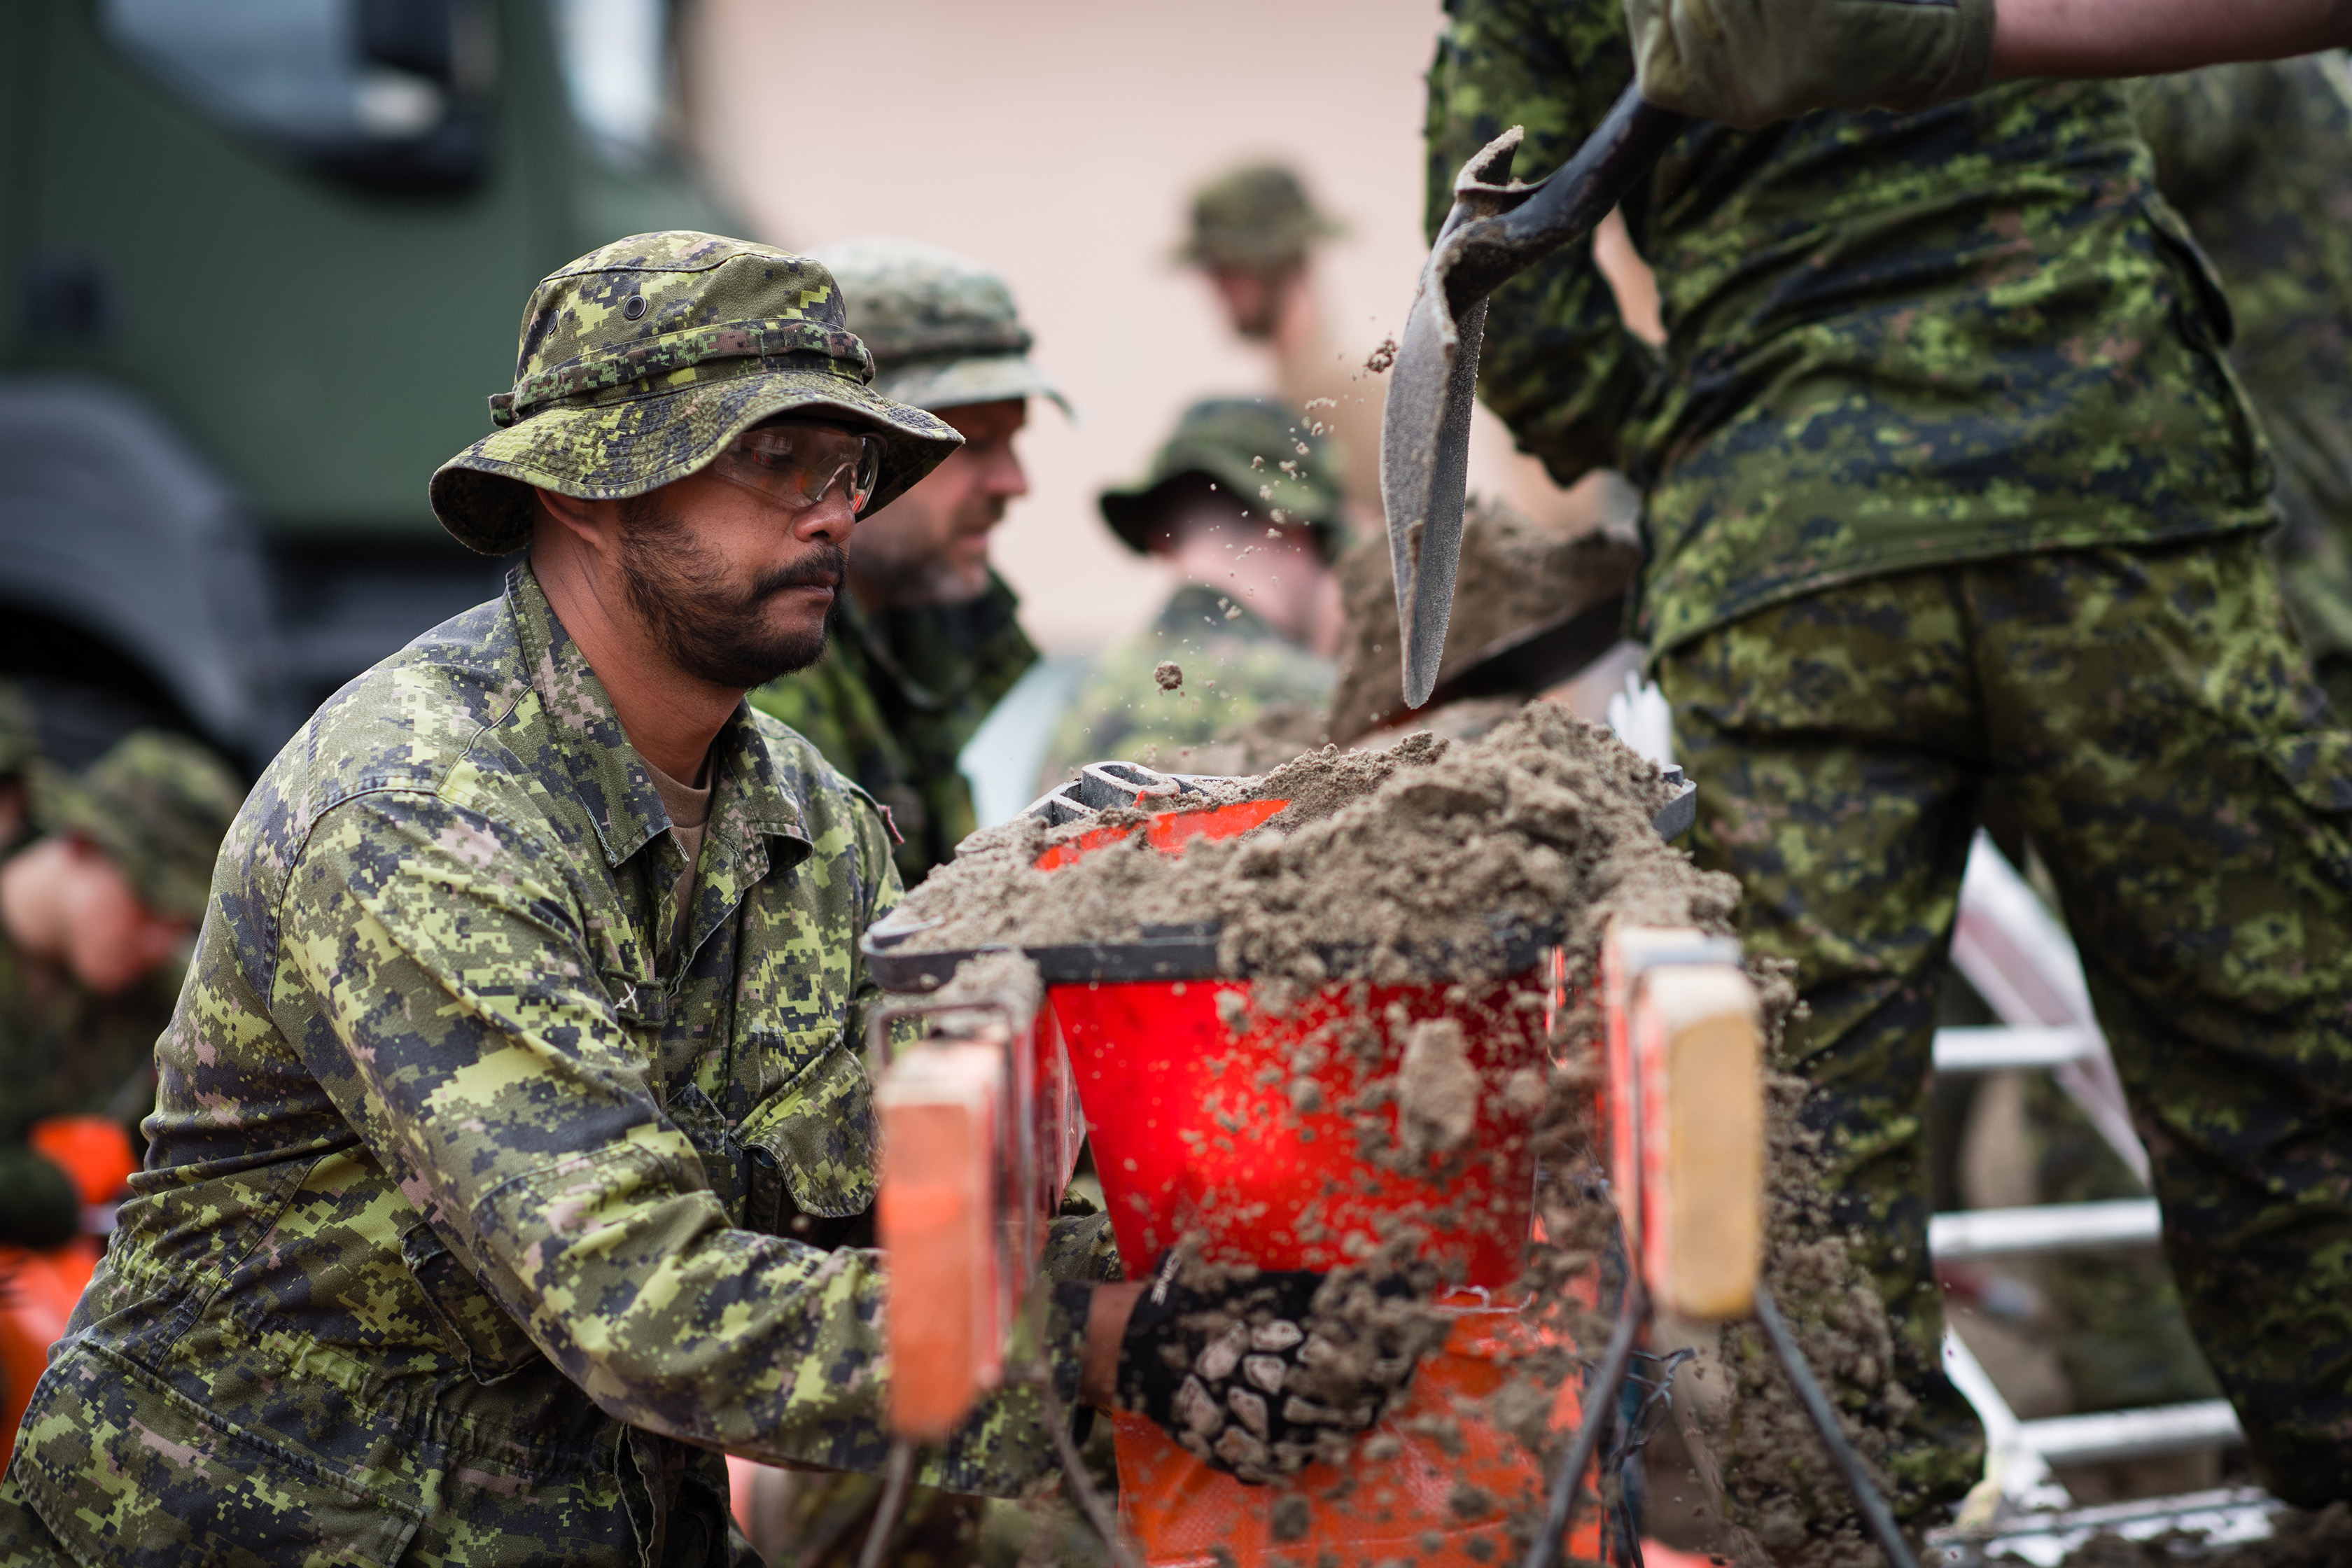 Canadian Armed Forces soldiers fill and move sandbags to fight the incoming flood waters in Gatineau, Quebec during Operation LENTUS on April 24, 2019. Photo: Corporal Brandon James Liddy, Canadian Forces Combat Camera